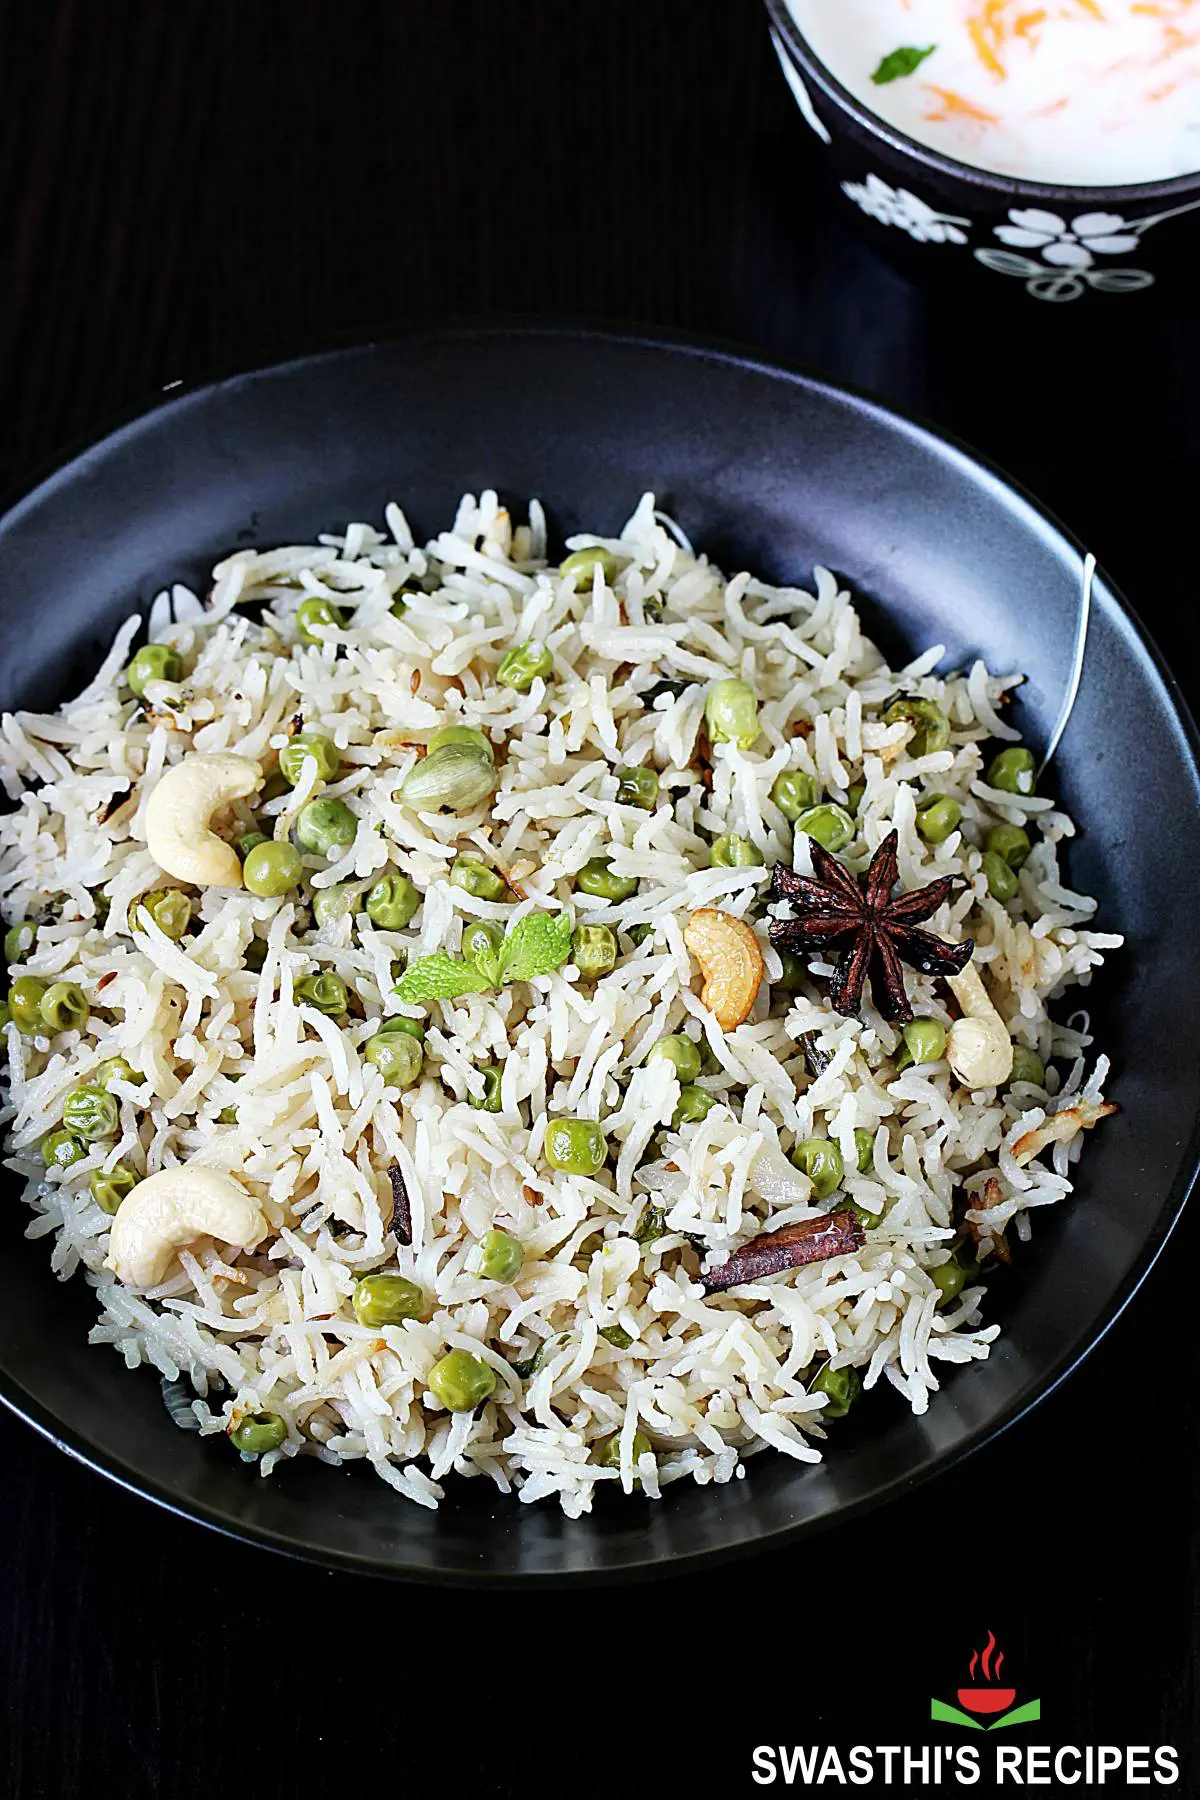 peas pulao also known as matar pulao served in a black plate